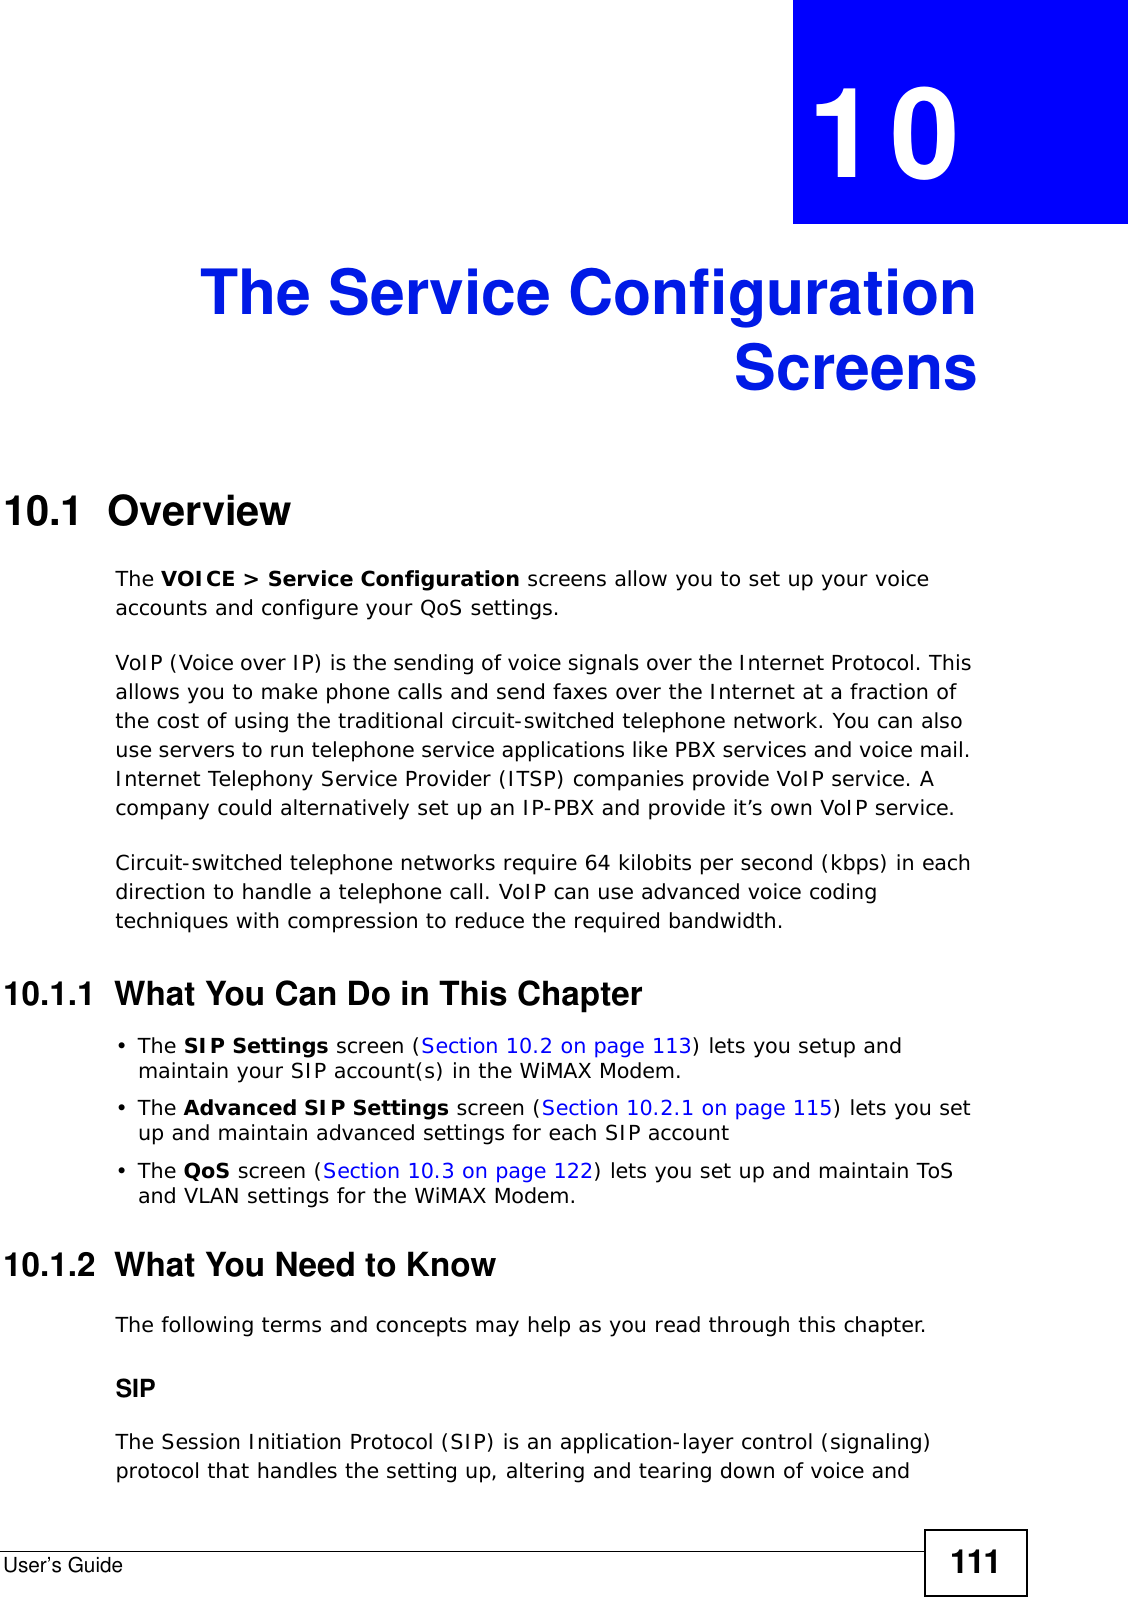 User’s Guide 111CHAPTER  10 The Service ConfigurationScreens10.1  OverviewThe VOICE &gt; Service Configuration screens allow you to set up your voice accounts and configure your QoS settings.VoIP (Voice over IP) is the sending of voice signals over the Internet Protocol. This allows you to make phone calls and send faxes over the Internet at a fraction of the cost of using the traditional circuit-switched telephone network. You can also use servers to run telephone service applications like PBX services and voice mail. Internet Telephony Service Provider (ITSP) companies provide VoIP service. A company could alternatively set up an IP-PBX and provide it’s own VoIP service.Circuit-switched telephone networks require 64 kilobits per second (kbps) in each direction to handle a telephone call. VoIP can use advanced voice coding techniques with compression to reduce the required bandwidth.10.1.1  What You Can Do in This Chapter•The SIP Settings screen (Section 10.2 on page 113) lets you setup and maintain your SIP account(s) in the WiMAX Modem.•The Advanced SIP Settings screen (Section 10.2.1 on page 115) lets you set up and maintain advanced settings for each SIP account•The QoS screen (Section 10.3 on page 122) lets you set up and maintain ToS and VLAN settings for the WiMAX Modem.10.1.2  What You Need to KnowThe following terms and concepts may help as you read through this chapter.SIPThe Session Initiation Protocol (SIP) is an application-layer control (signaling) protocol that handles the setting up, altering and tearing down of voice and 